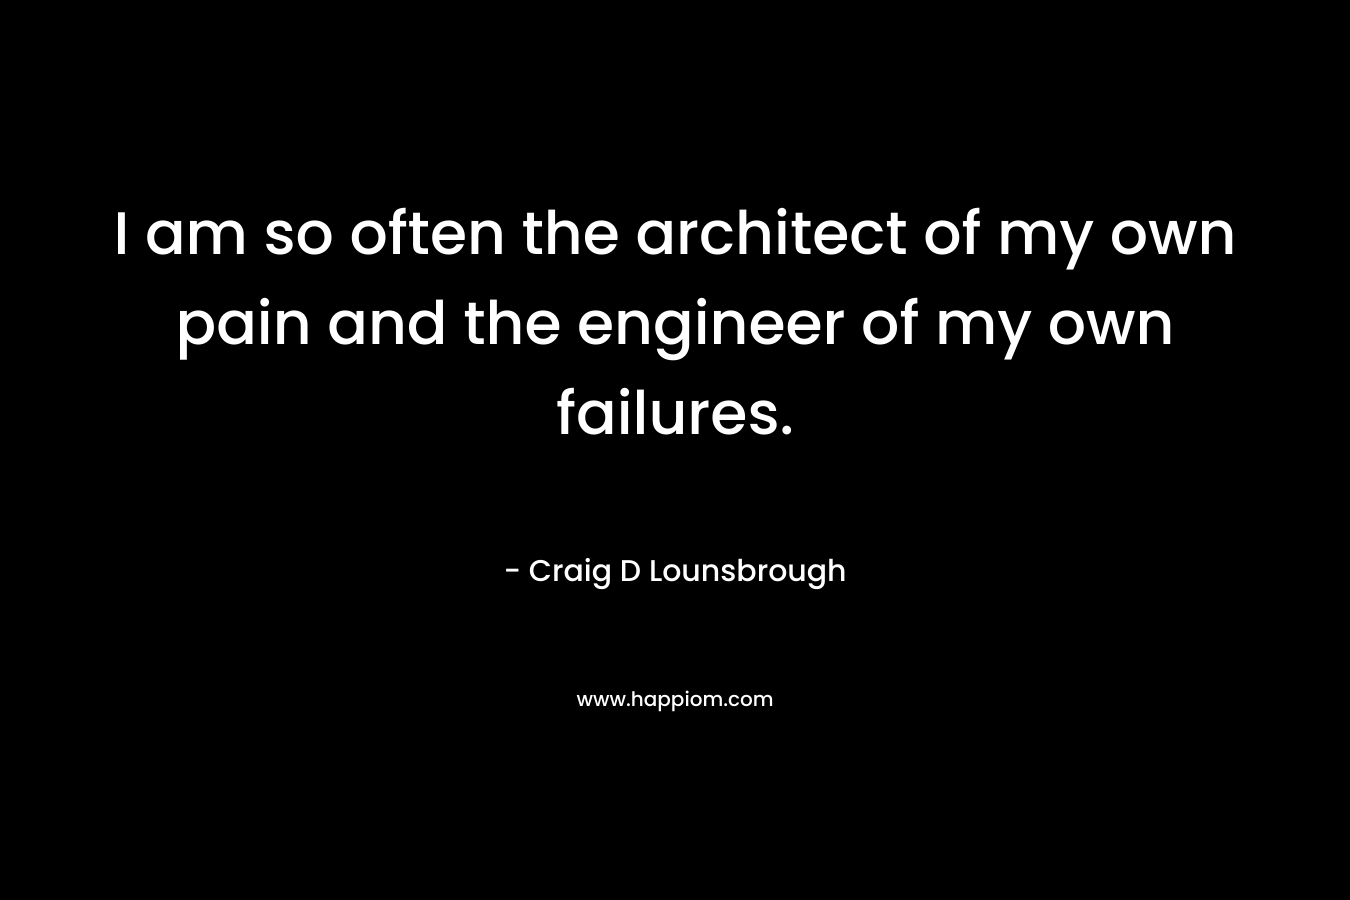 I am so often the architect of my own pain and the engineer of my own failures. – Craig D Lounsbrough